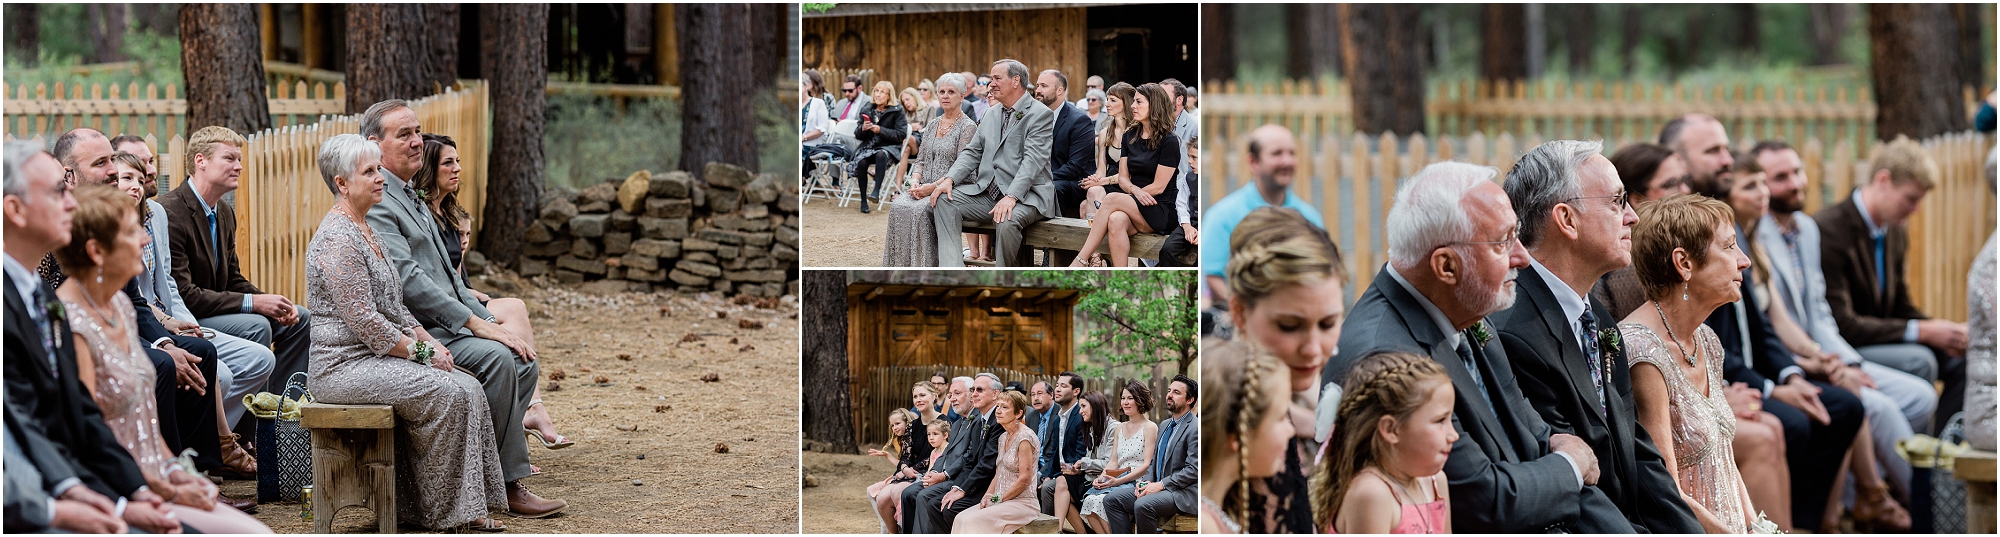 The parents of the bride and groom look on as their children say their vows at the outdoor rustic wedding venue The High Desert Museum in Bend, OR. | Erica Swantek Photography